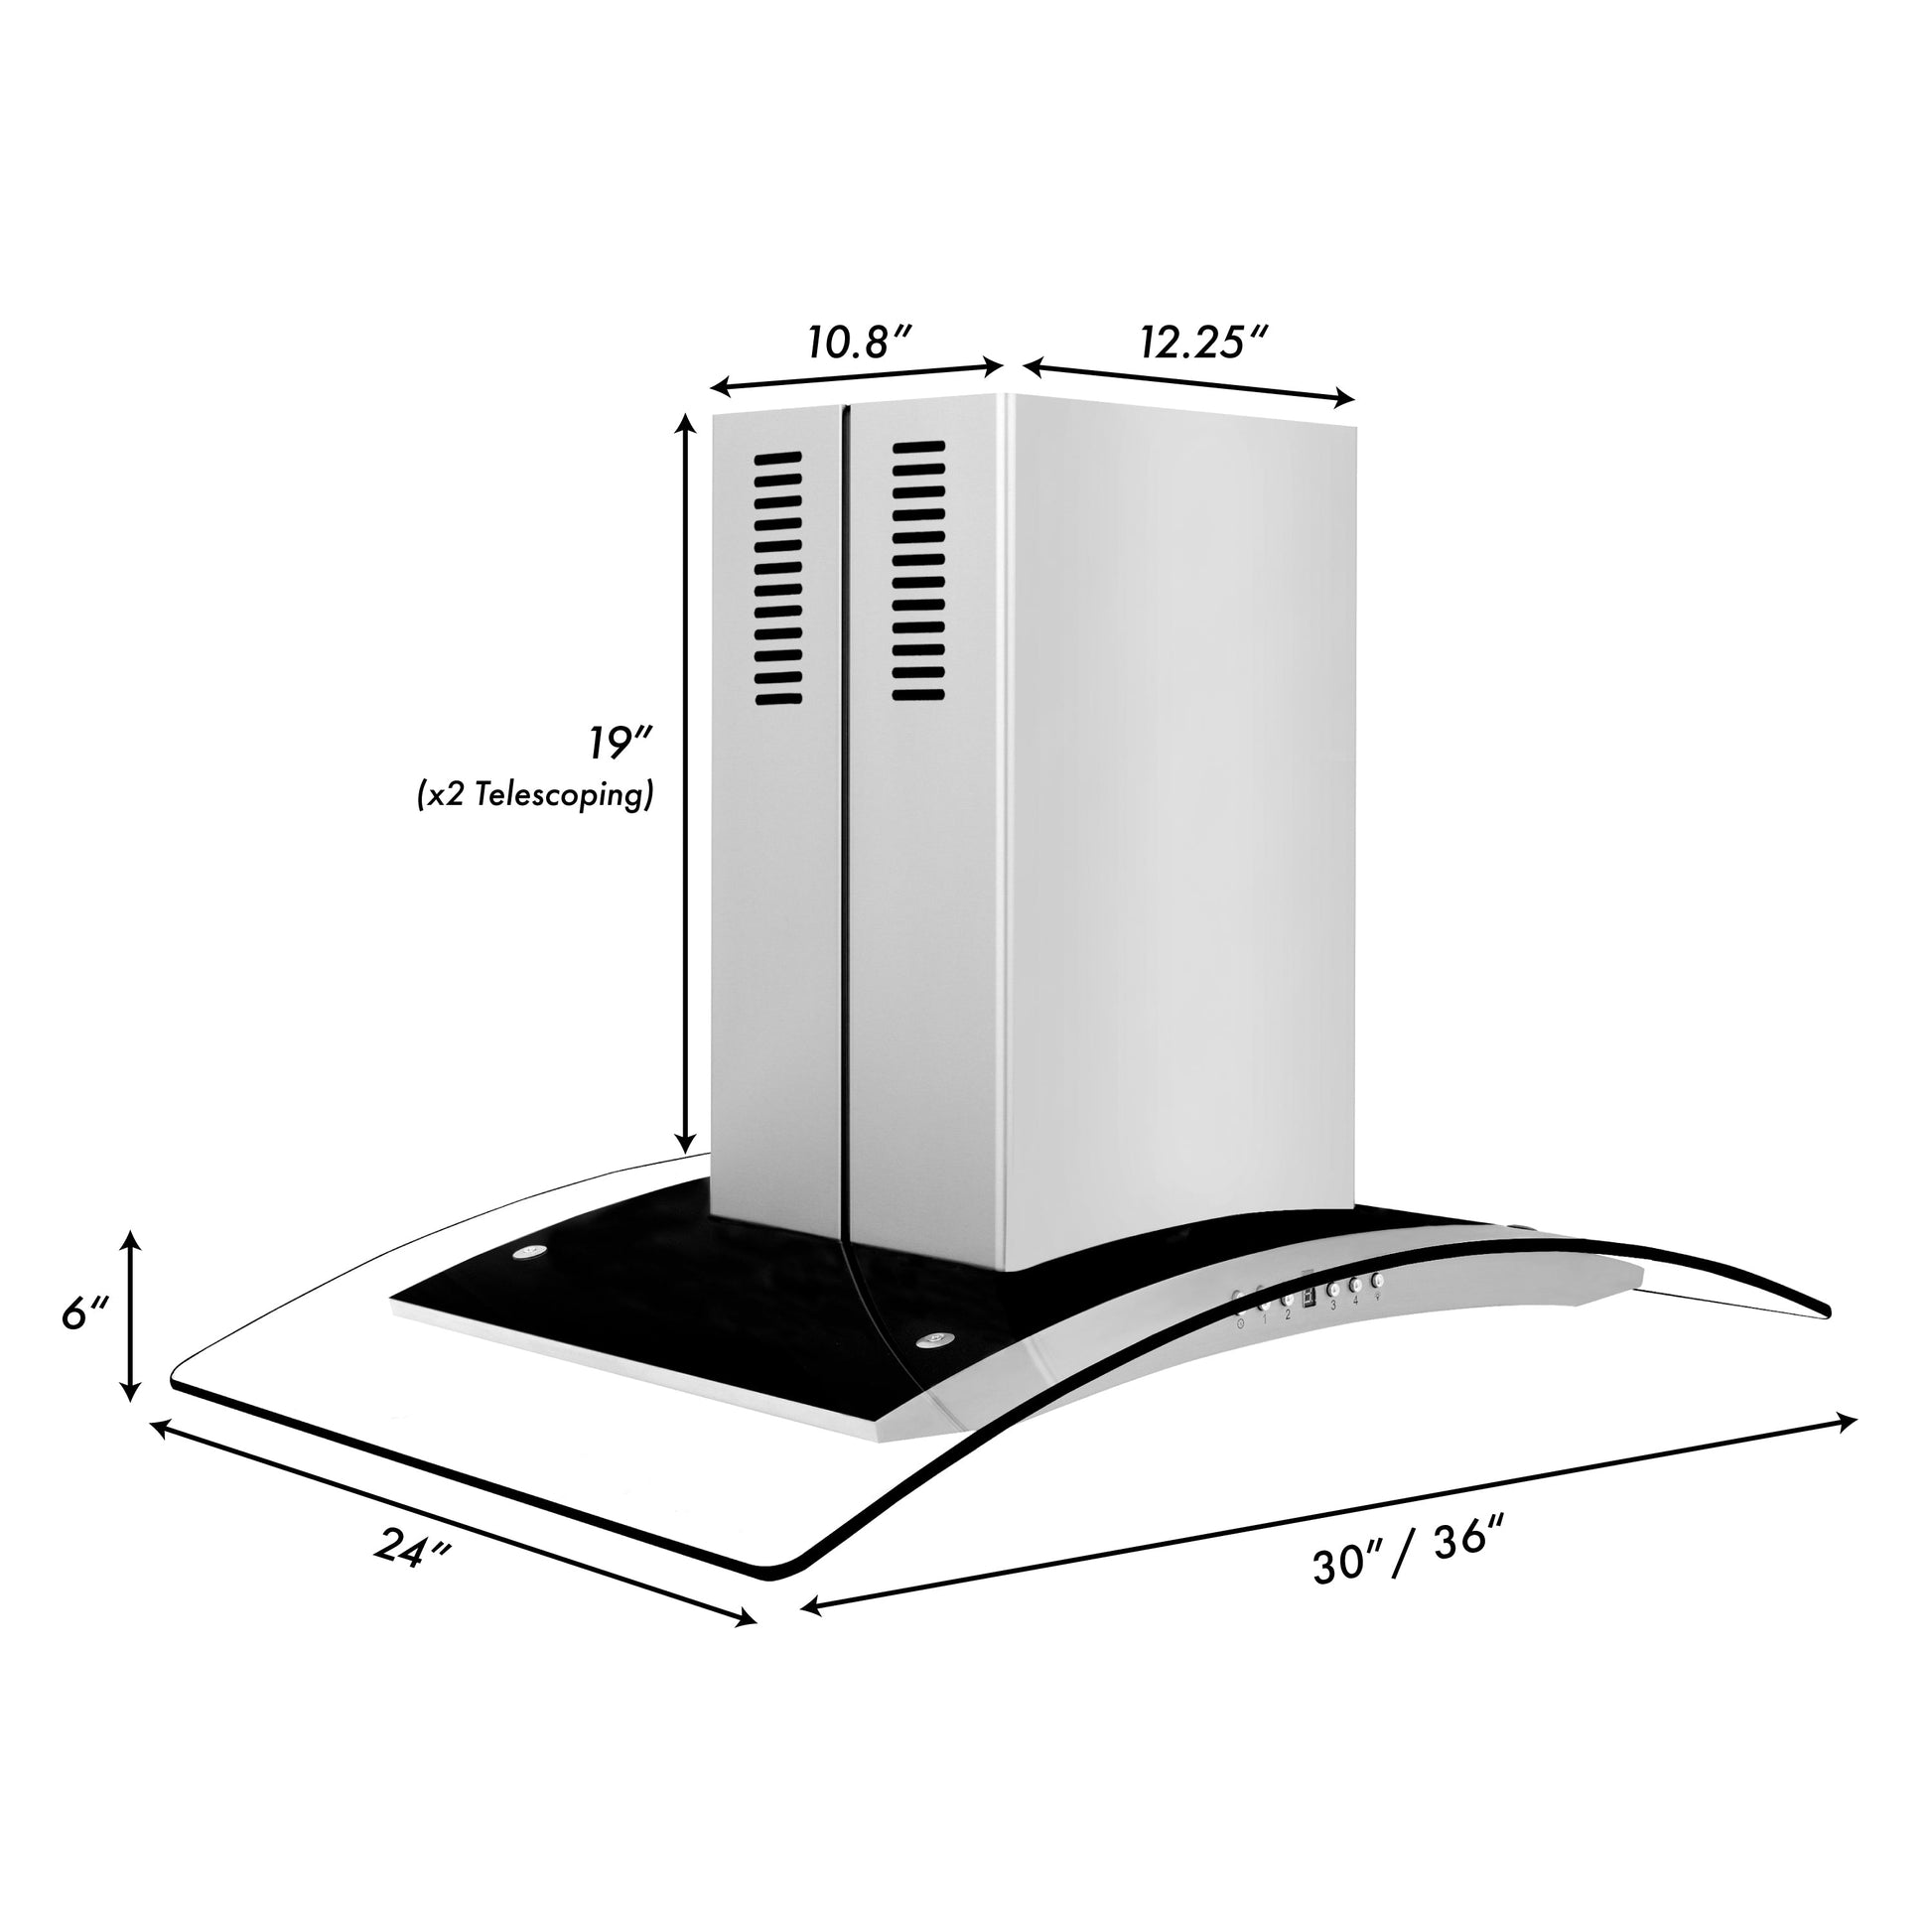 ZLINE Convertible Vent Island Mount Range Hood in Stainless Steel and Glass (GL14i) dimensional diagram with measurements.